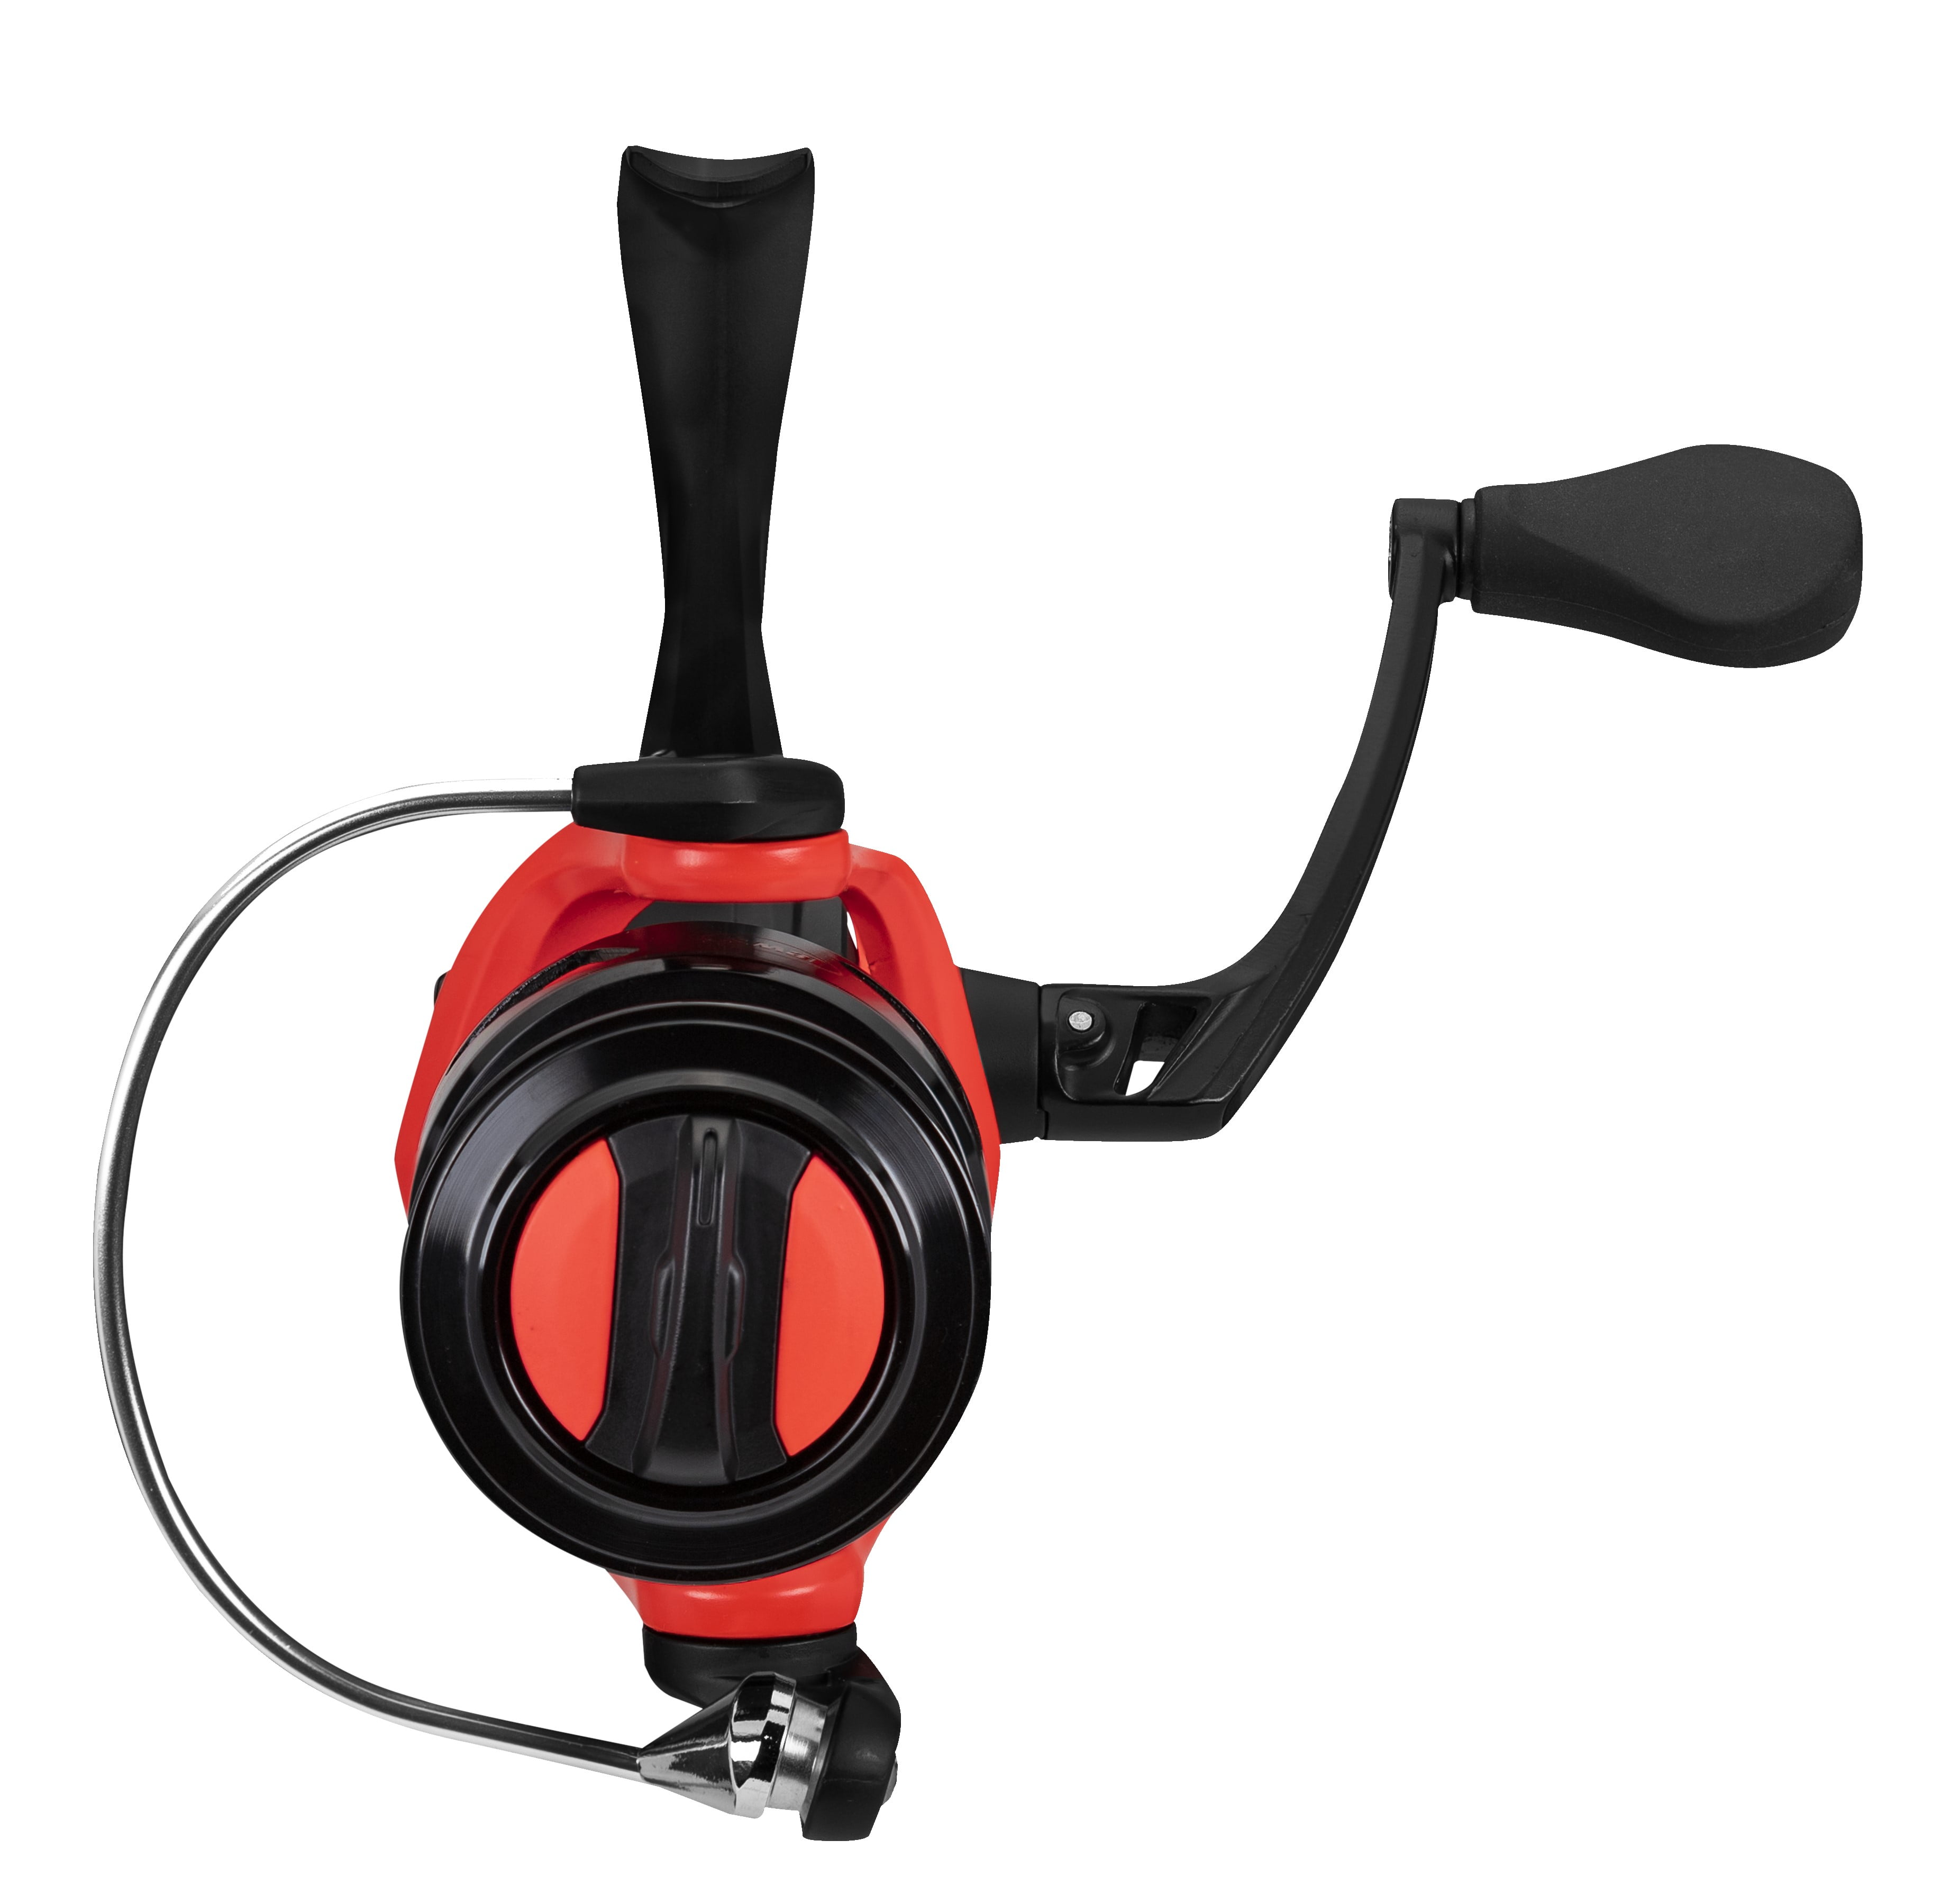 Lew's LZR Pro Speed Spin Rotor Reel LZRP30 Black & Red 10 Bearing System 6.2:1 